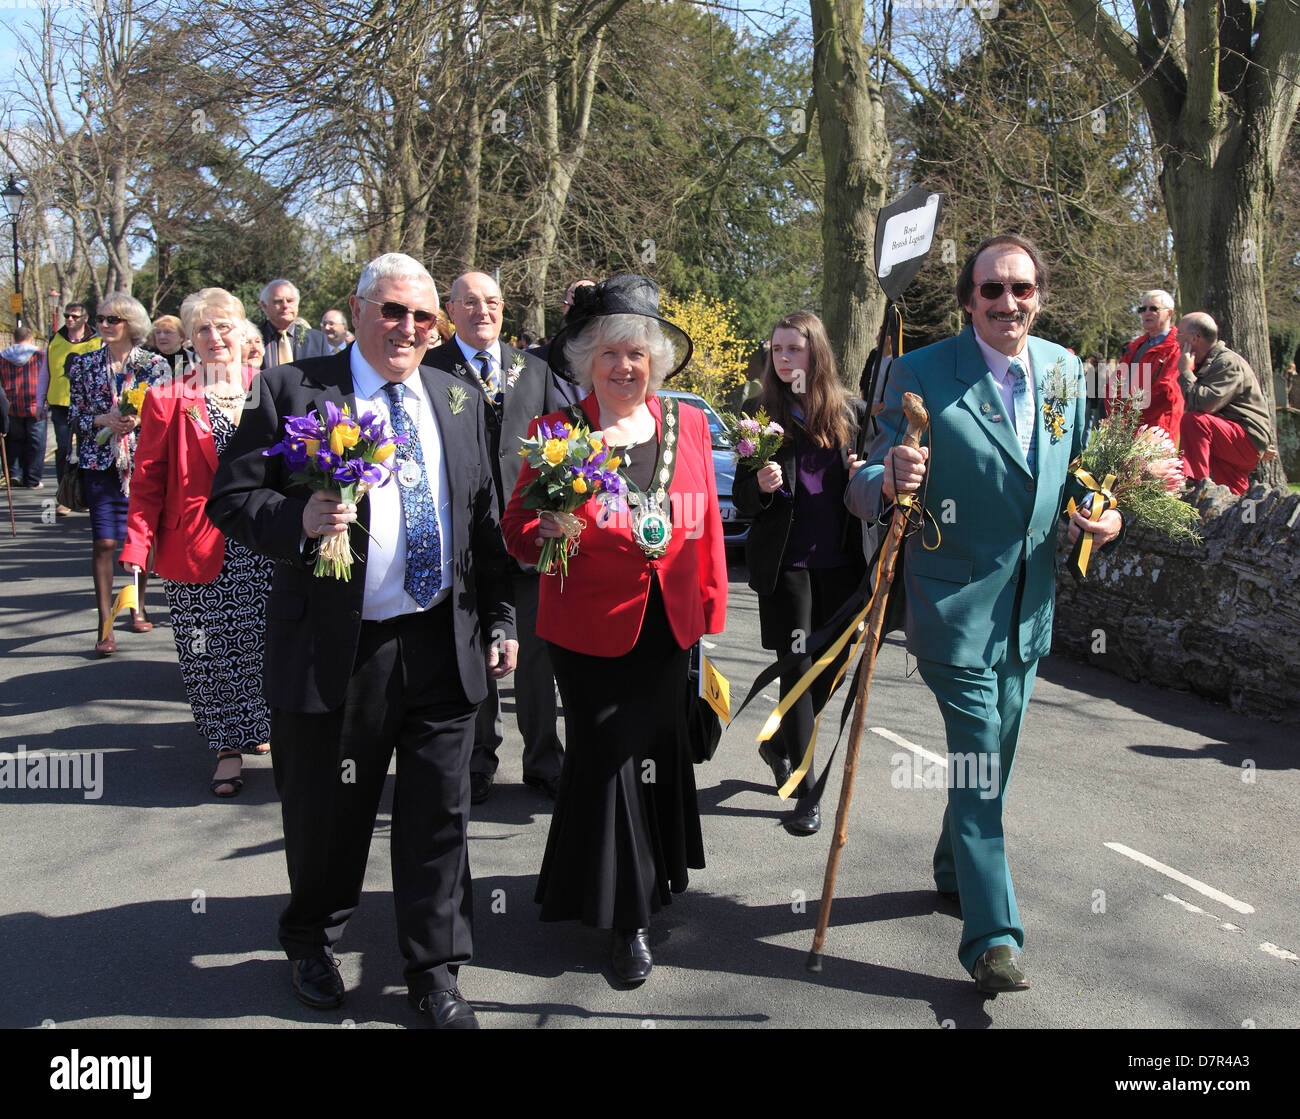 Citizens walk to the church celebrating William Shakespeare, at the annual Birthday Memorial Parade at Stratford upon Avon. Stock Photo